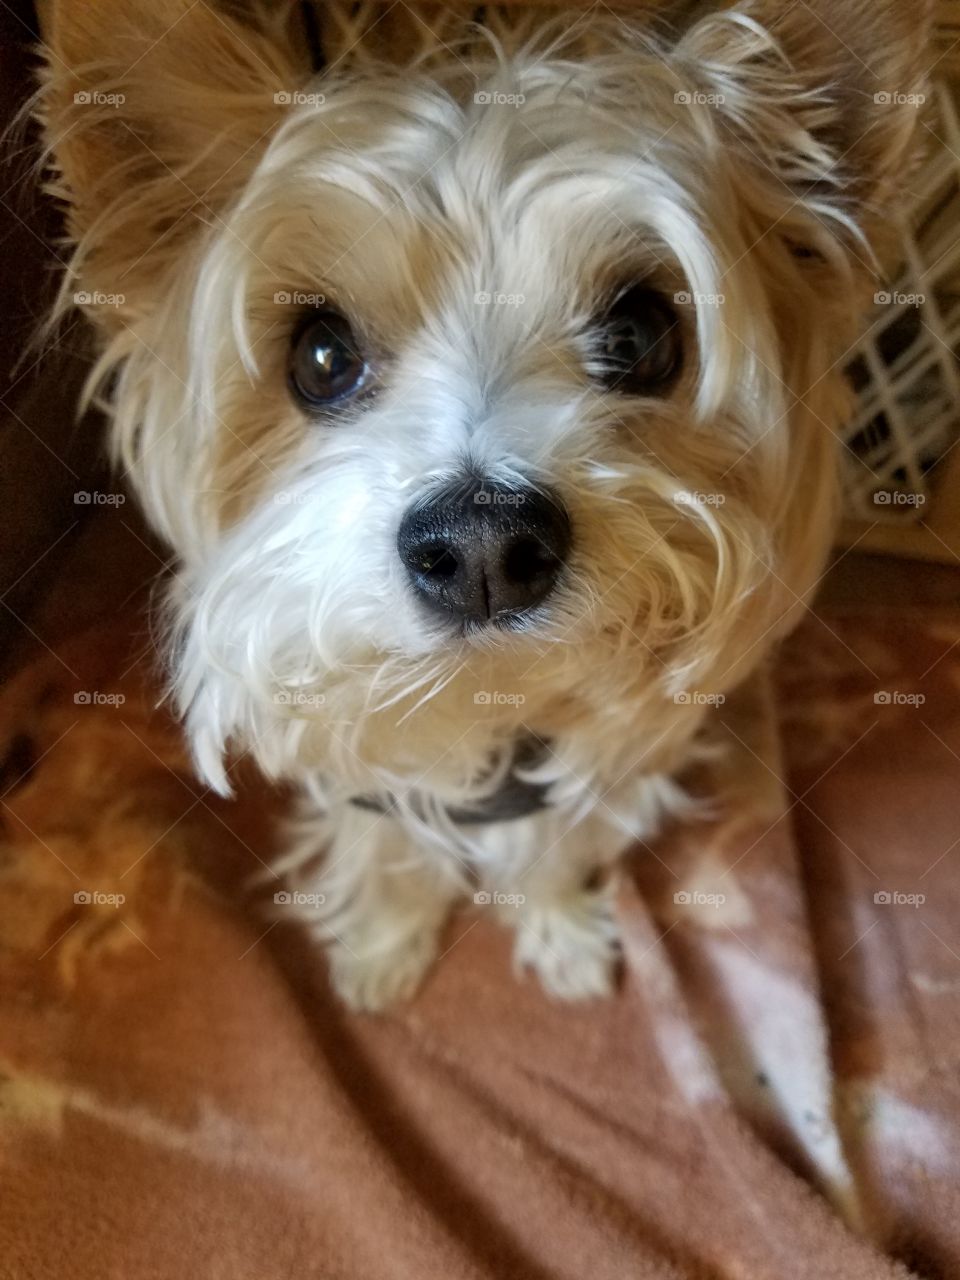 Small white shih-tzu with long hair and black needy eyes.